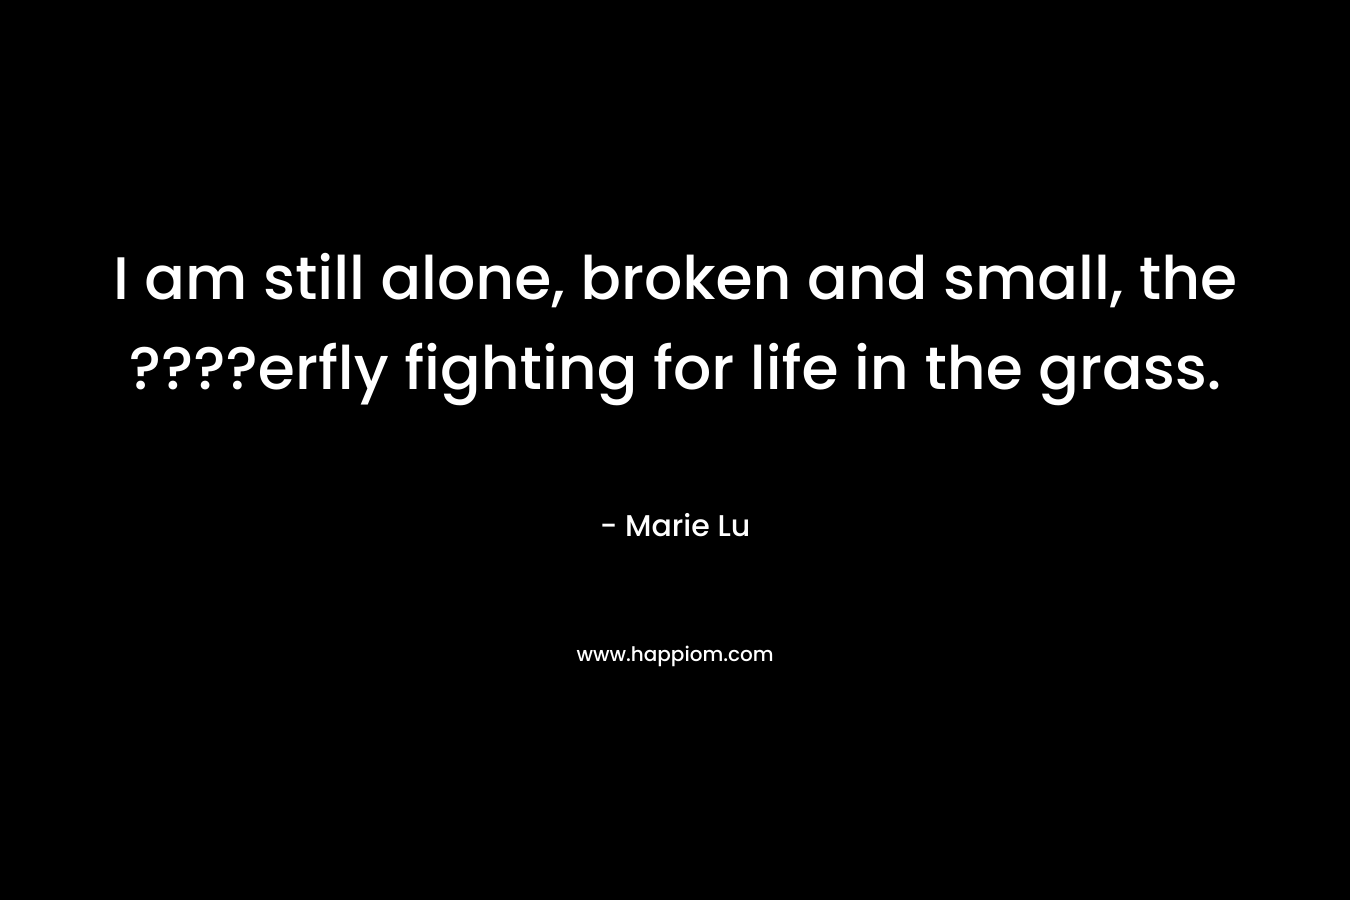 I am still alone, broken and small, the ????erfly fighting for life in the grass. – Marie Lu